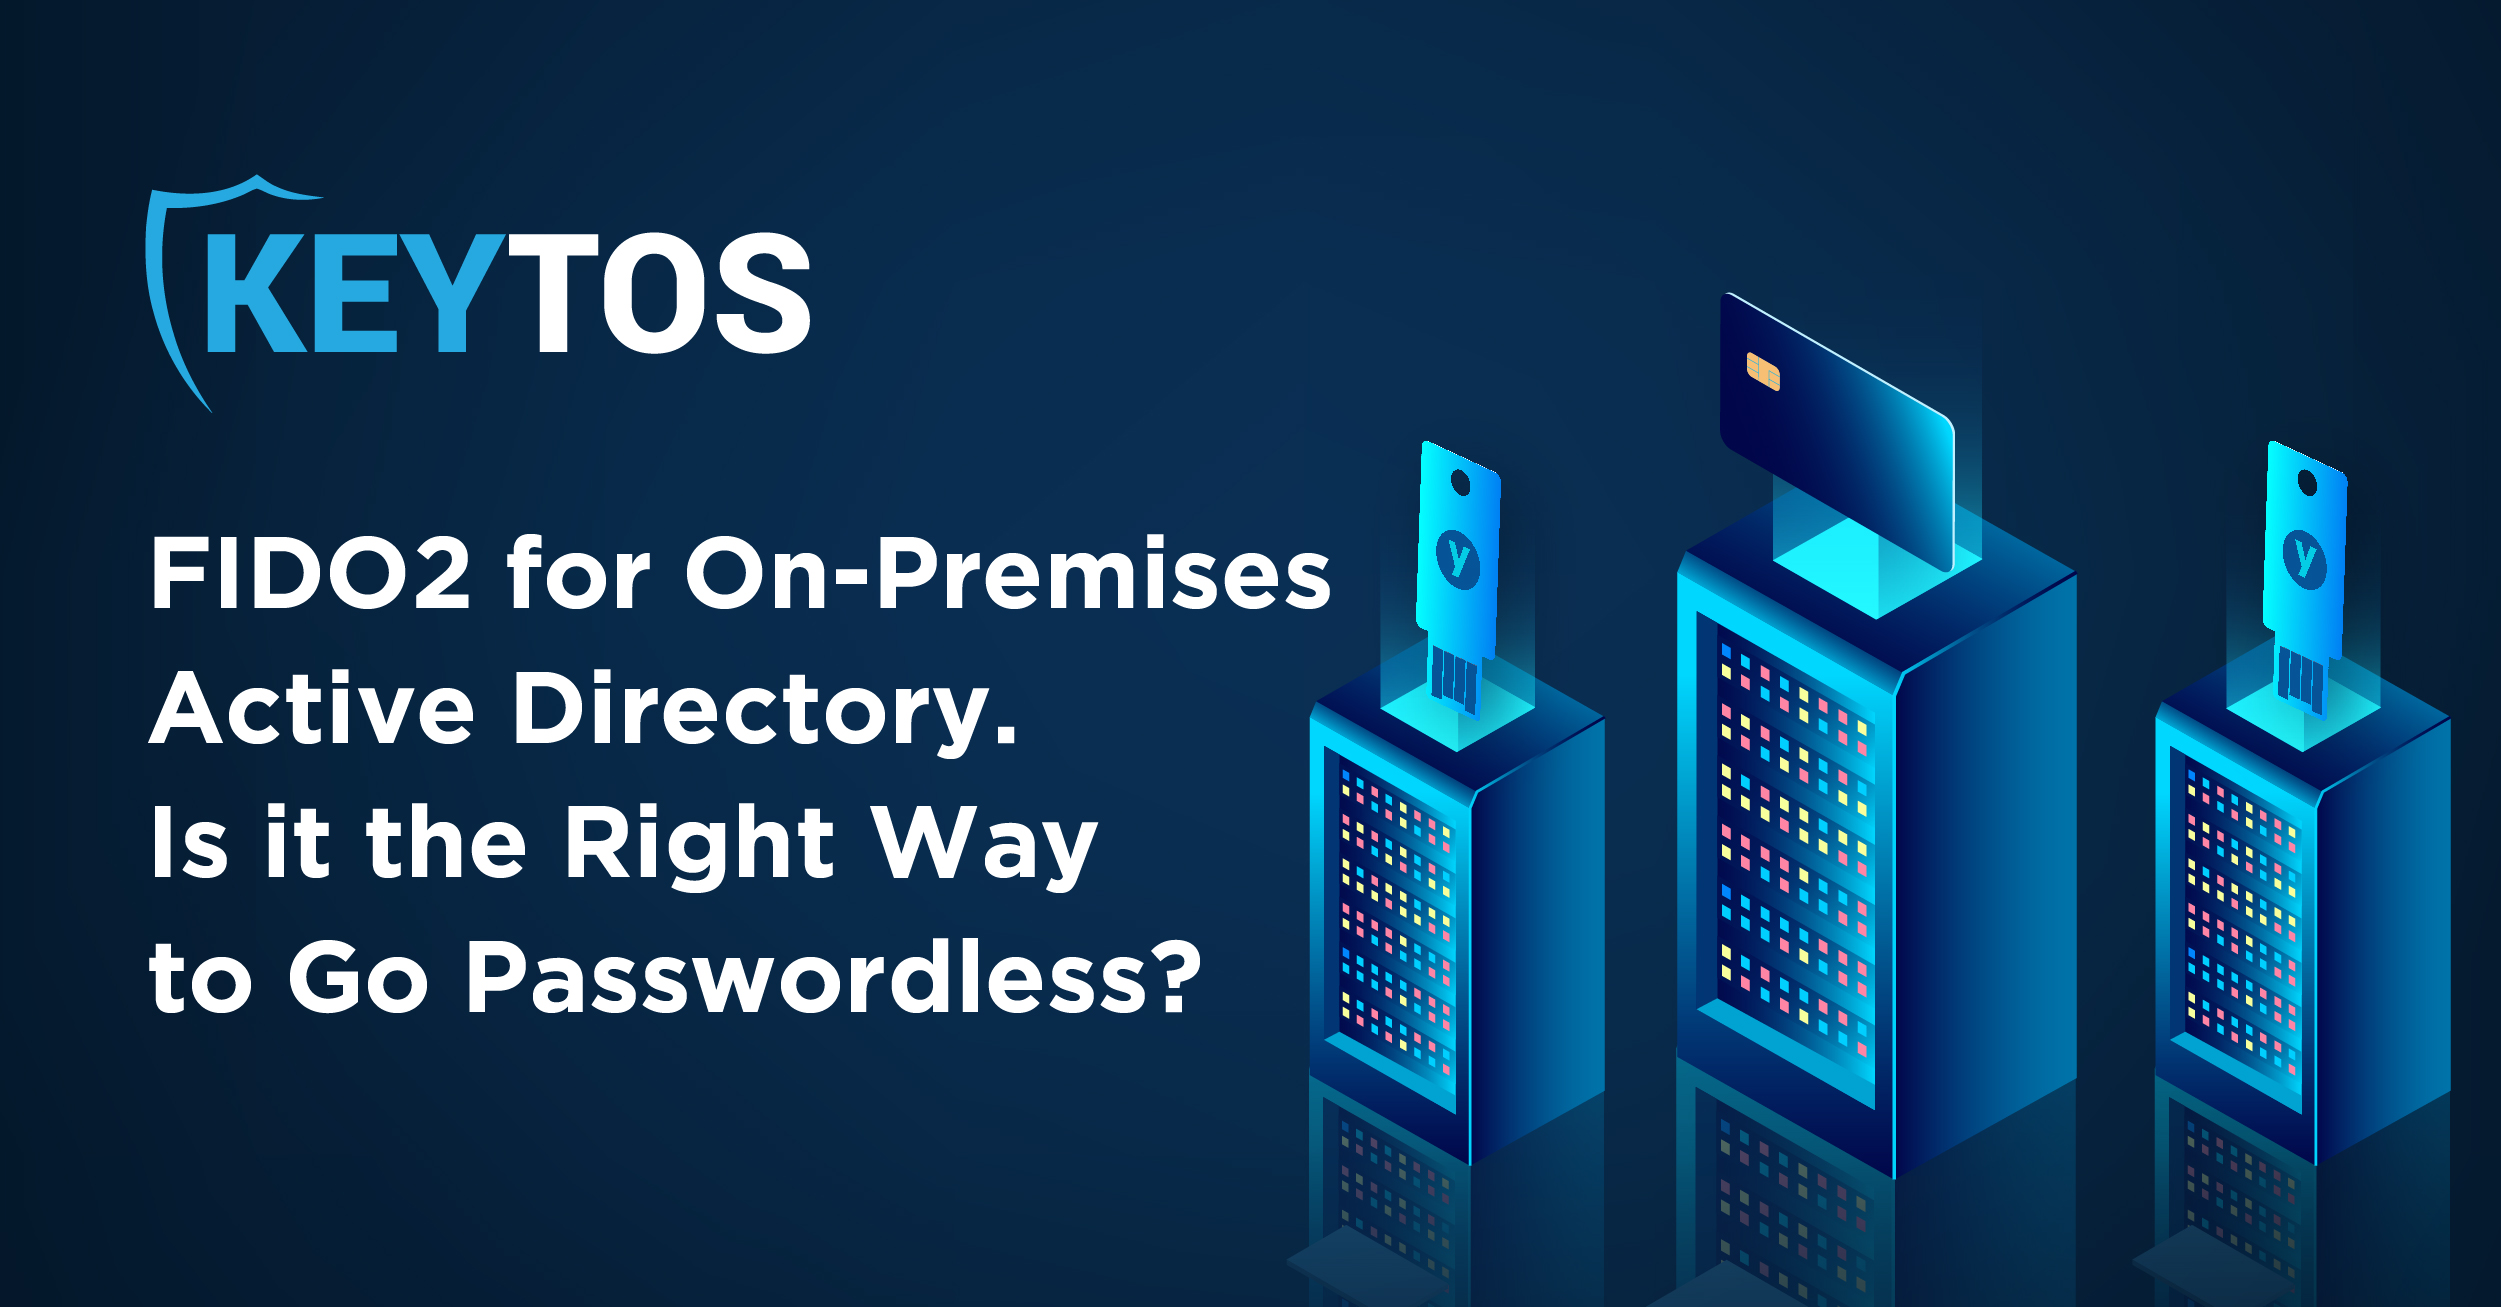 FIDO2 for On-Premises Active Directory. Is it the Right Way to Go Passwordless?